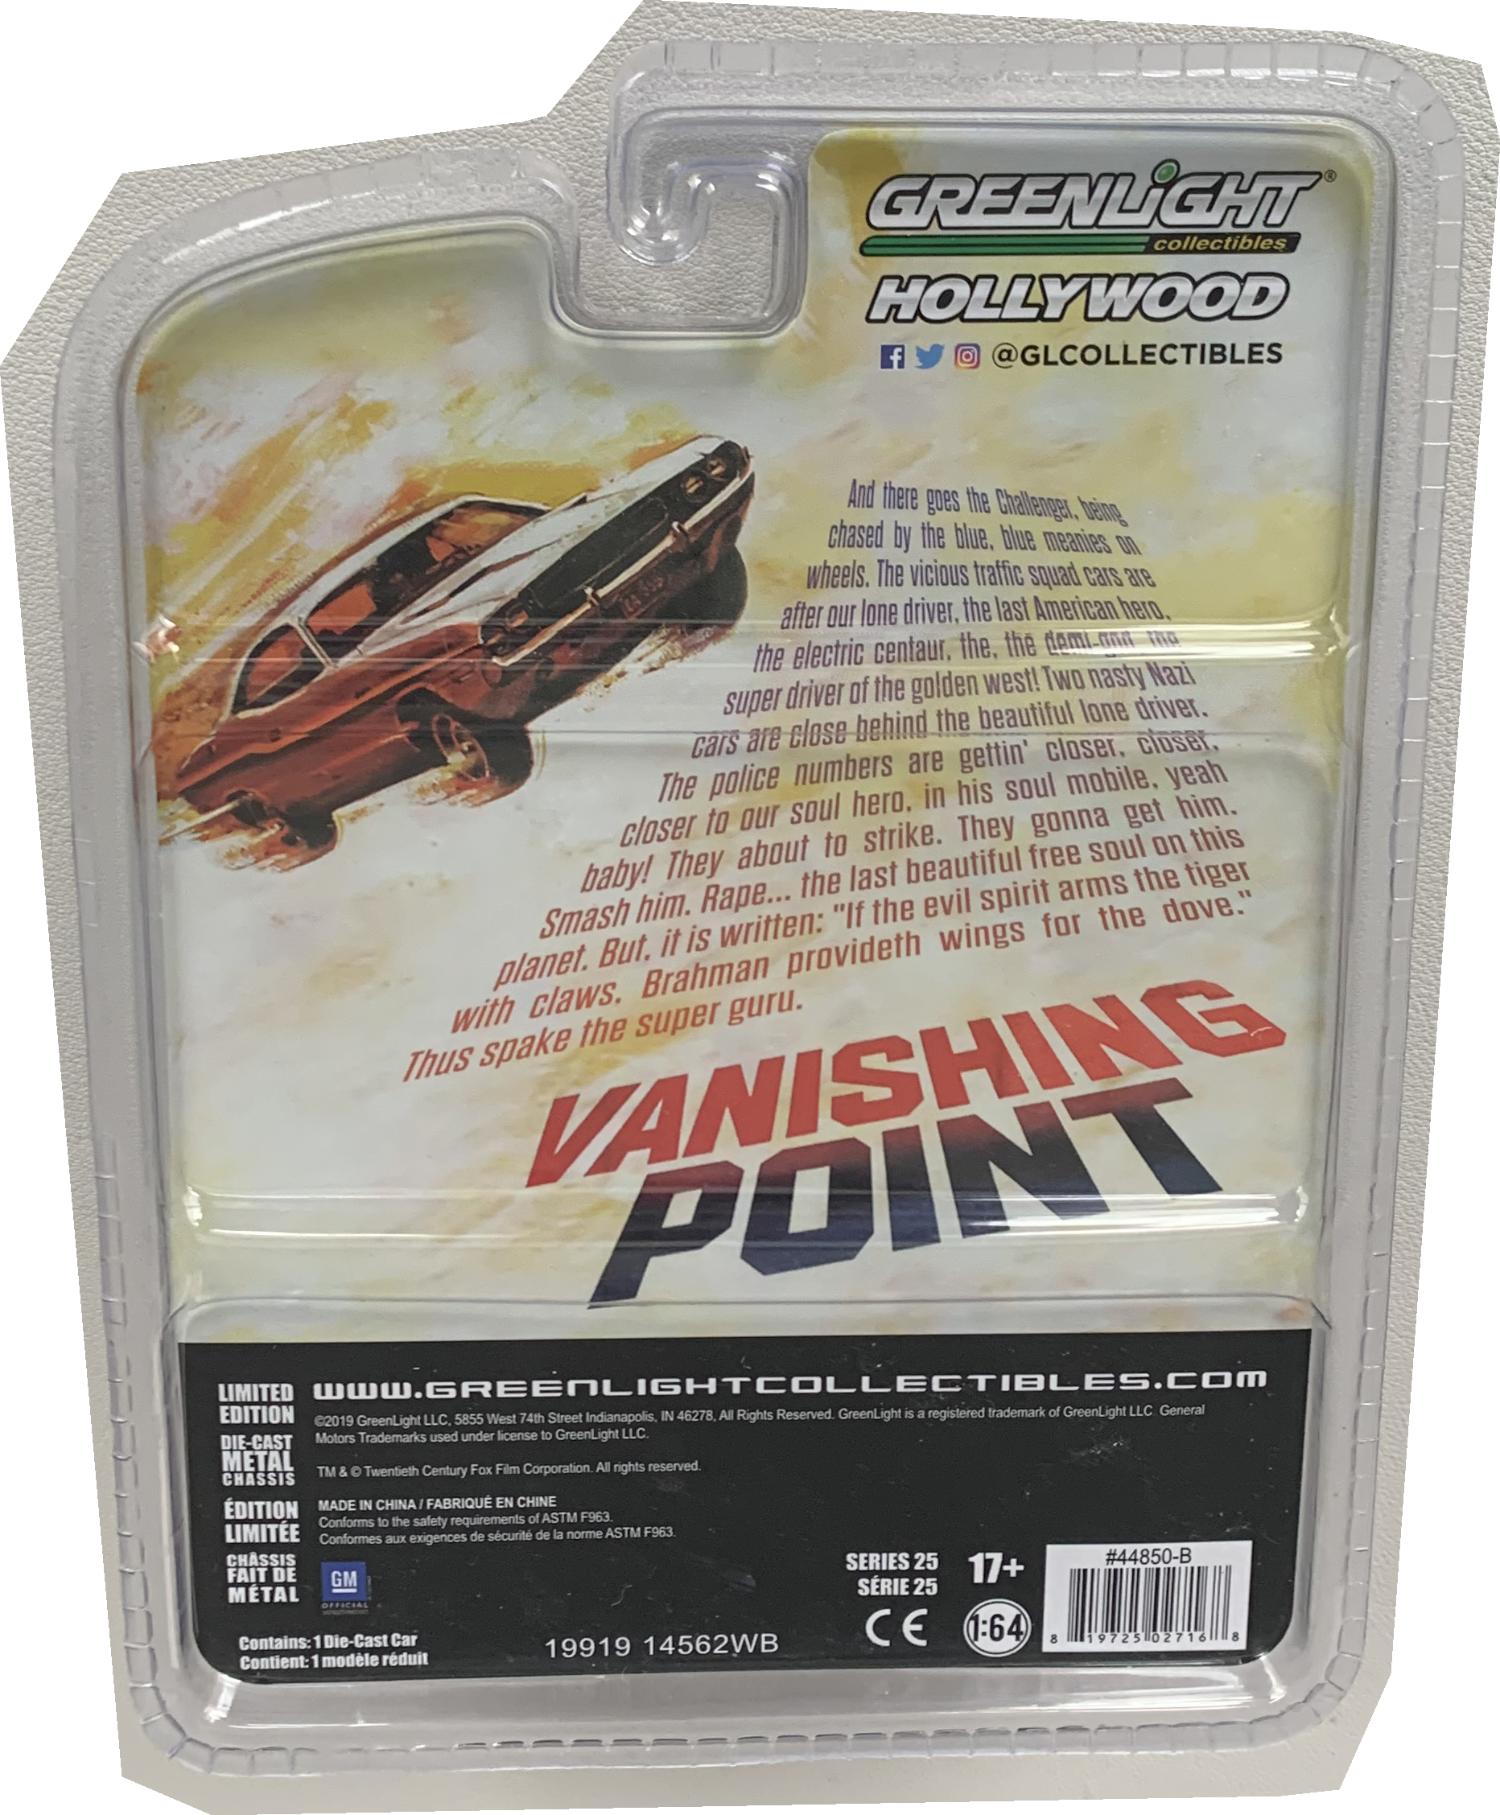 Vanishing Point 1970 Chevrolet Chevelle in metallic green 1:64 scale model from Greenlight , limited edition model